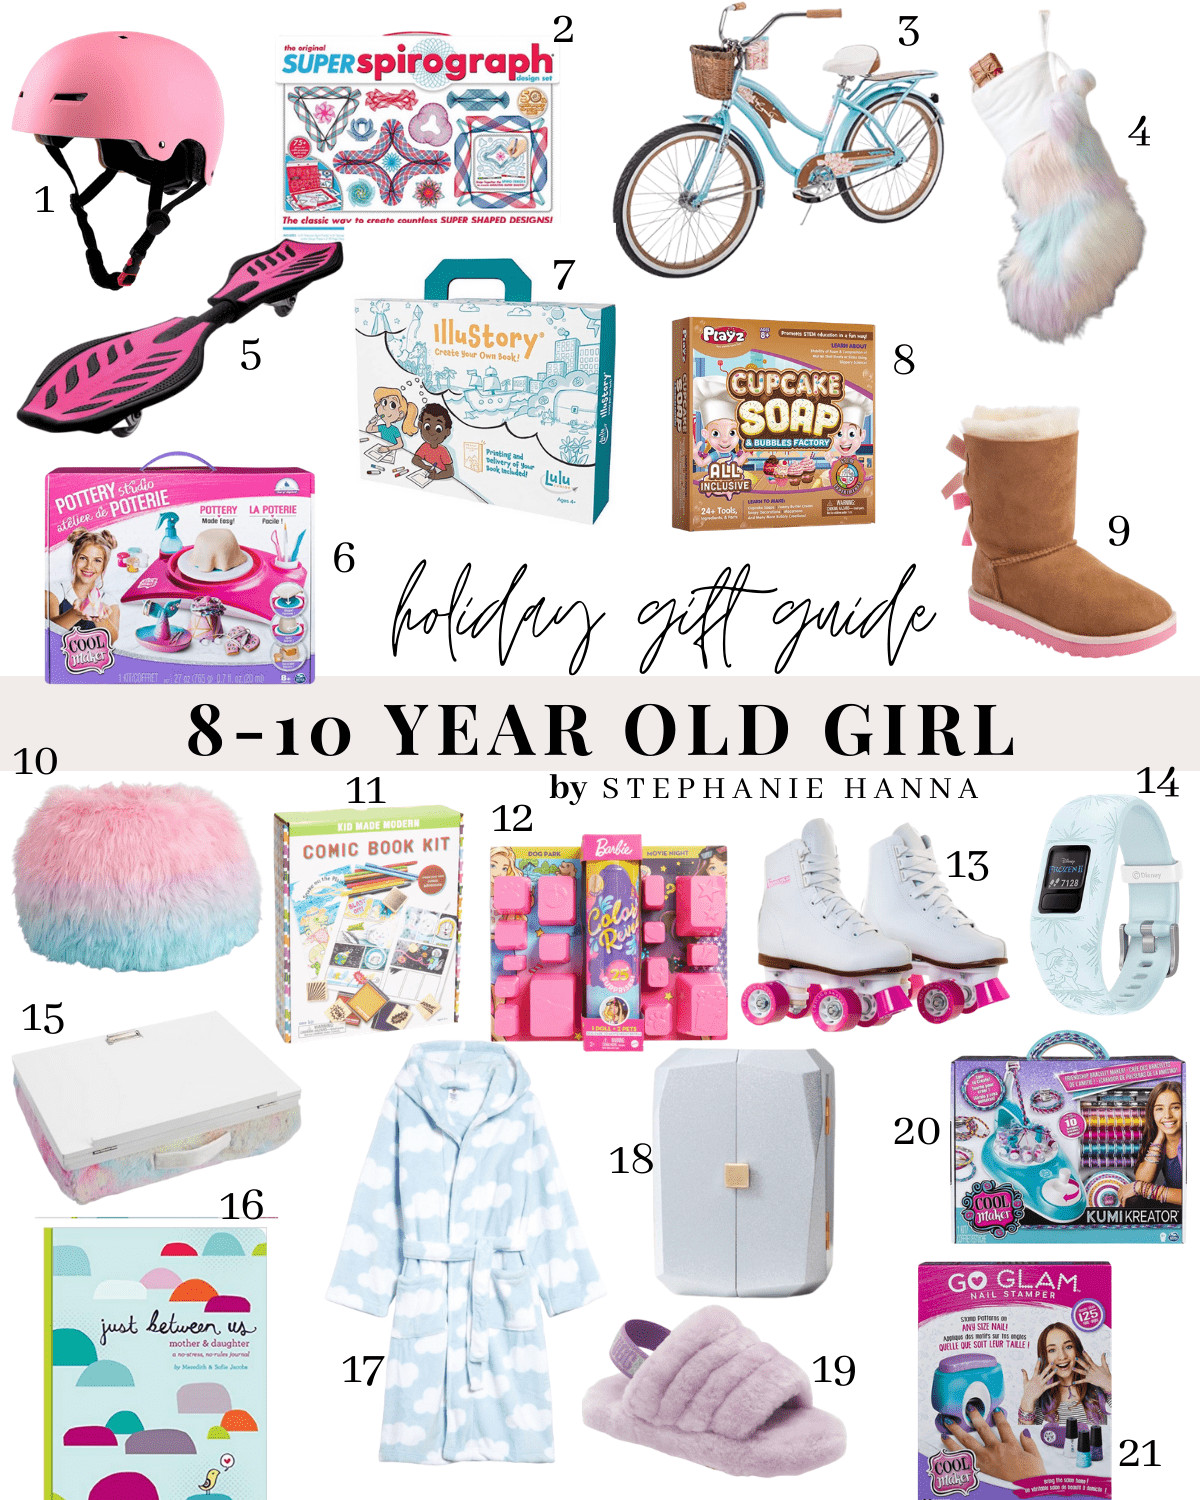 Gift Ideas For Girls 10 Years Old
 Gifts for 8 10 year old Girl – Stephanie Hanna Blog